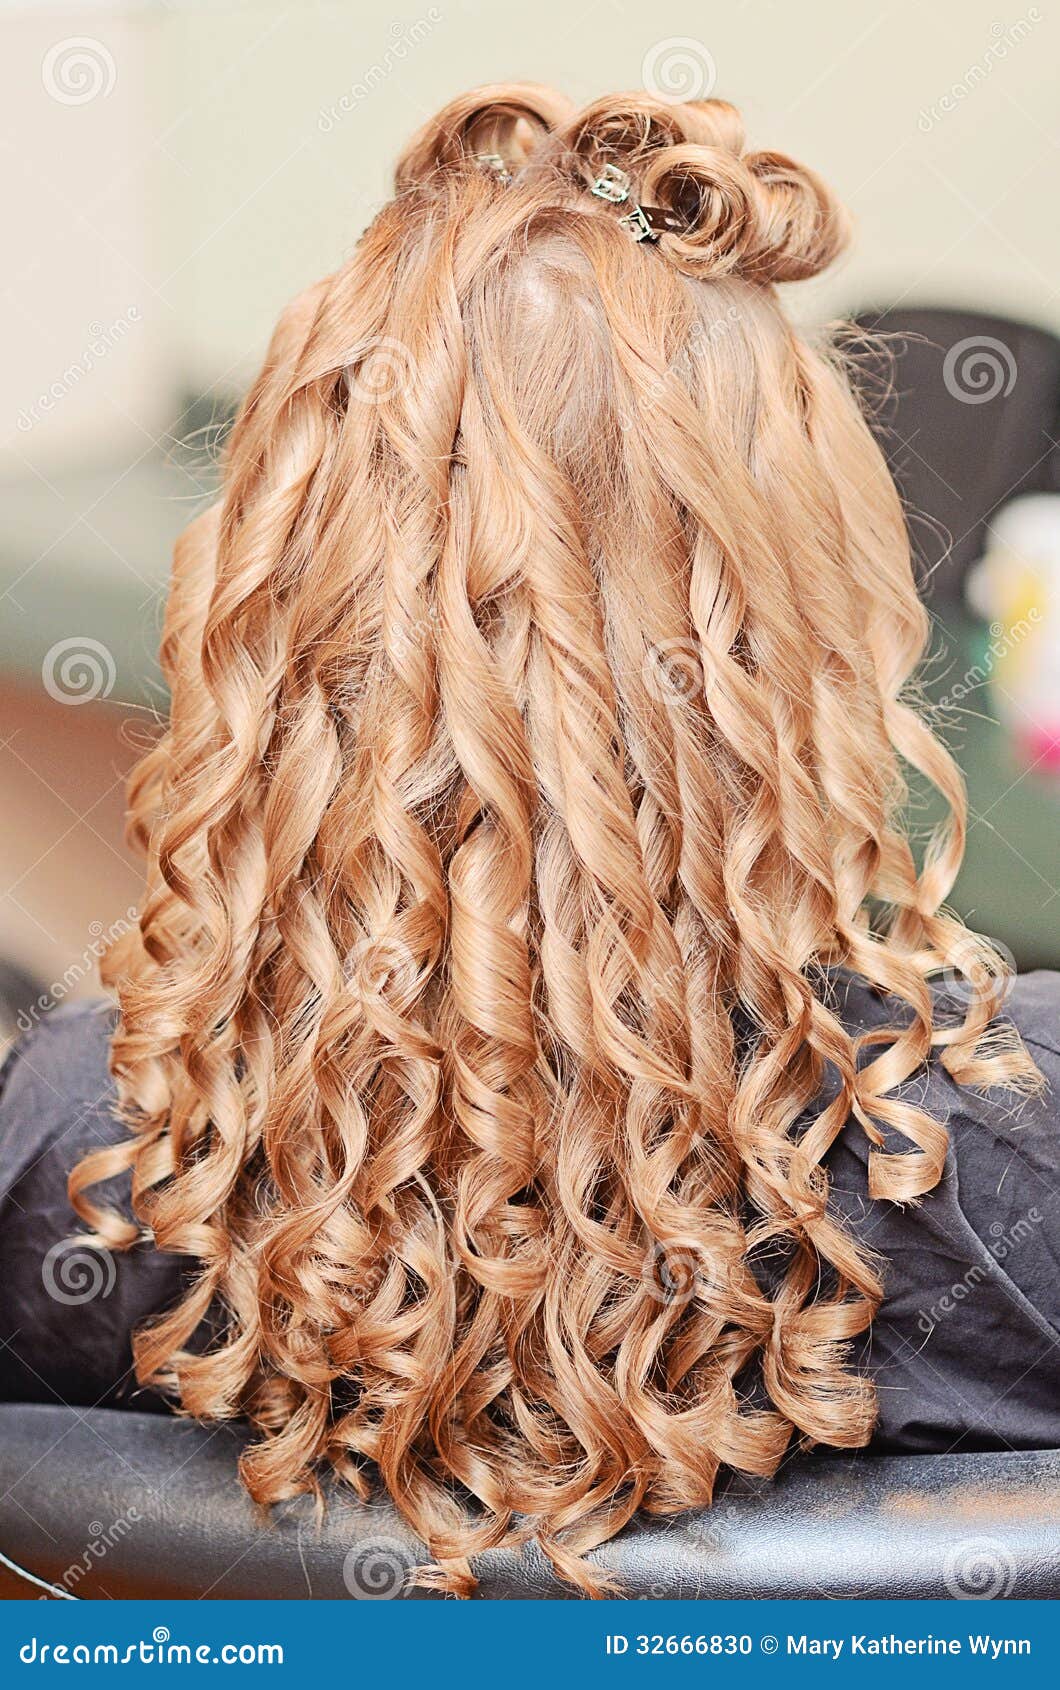 Curly hair styling stock photo. Image of curling, style - 32666830